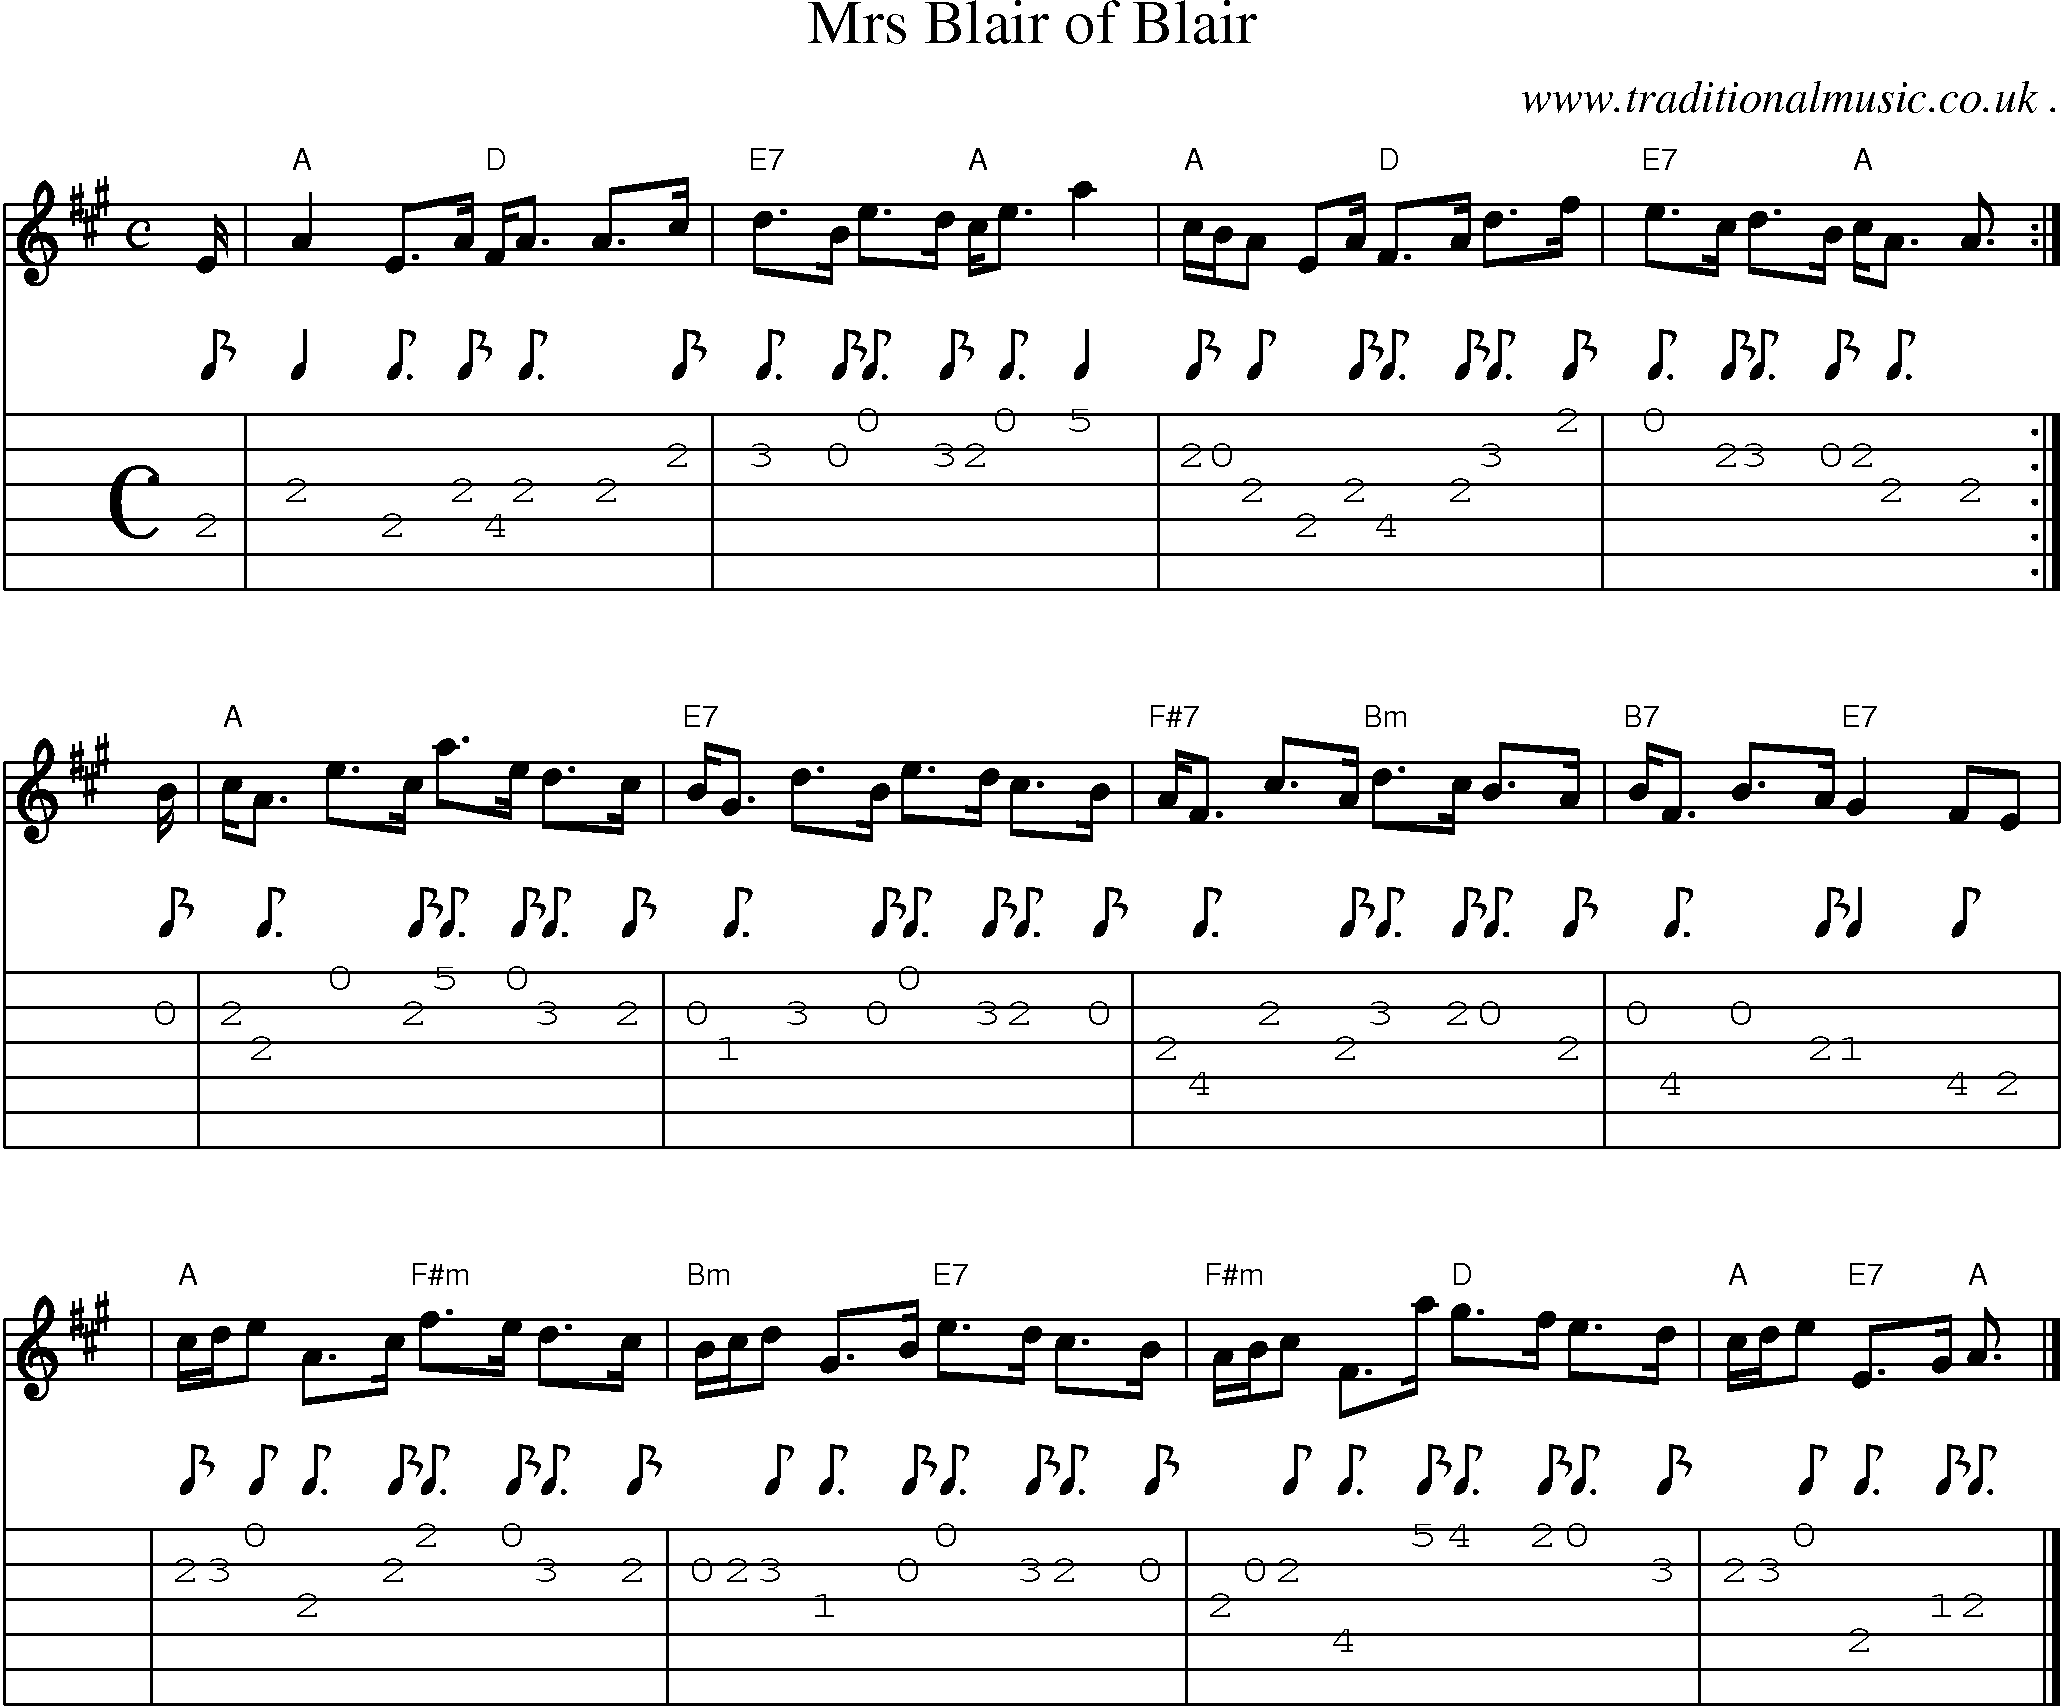 Sheet-music  score, Chords and Guitar Tabs for Mrs Blair Of Blair